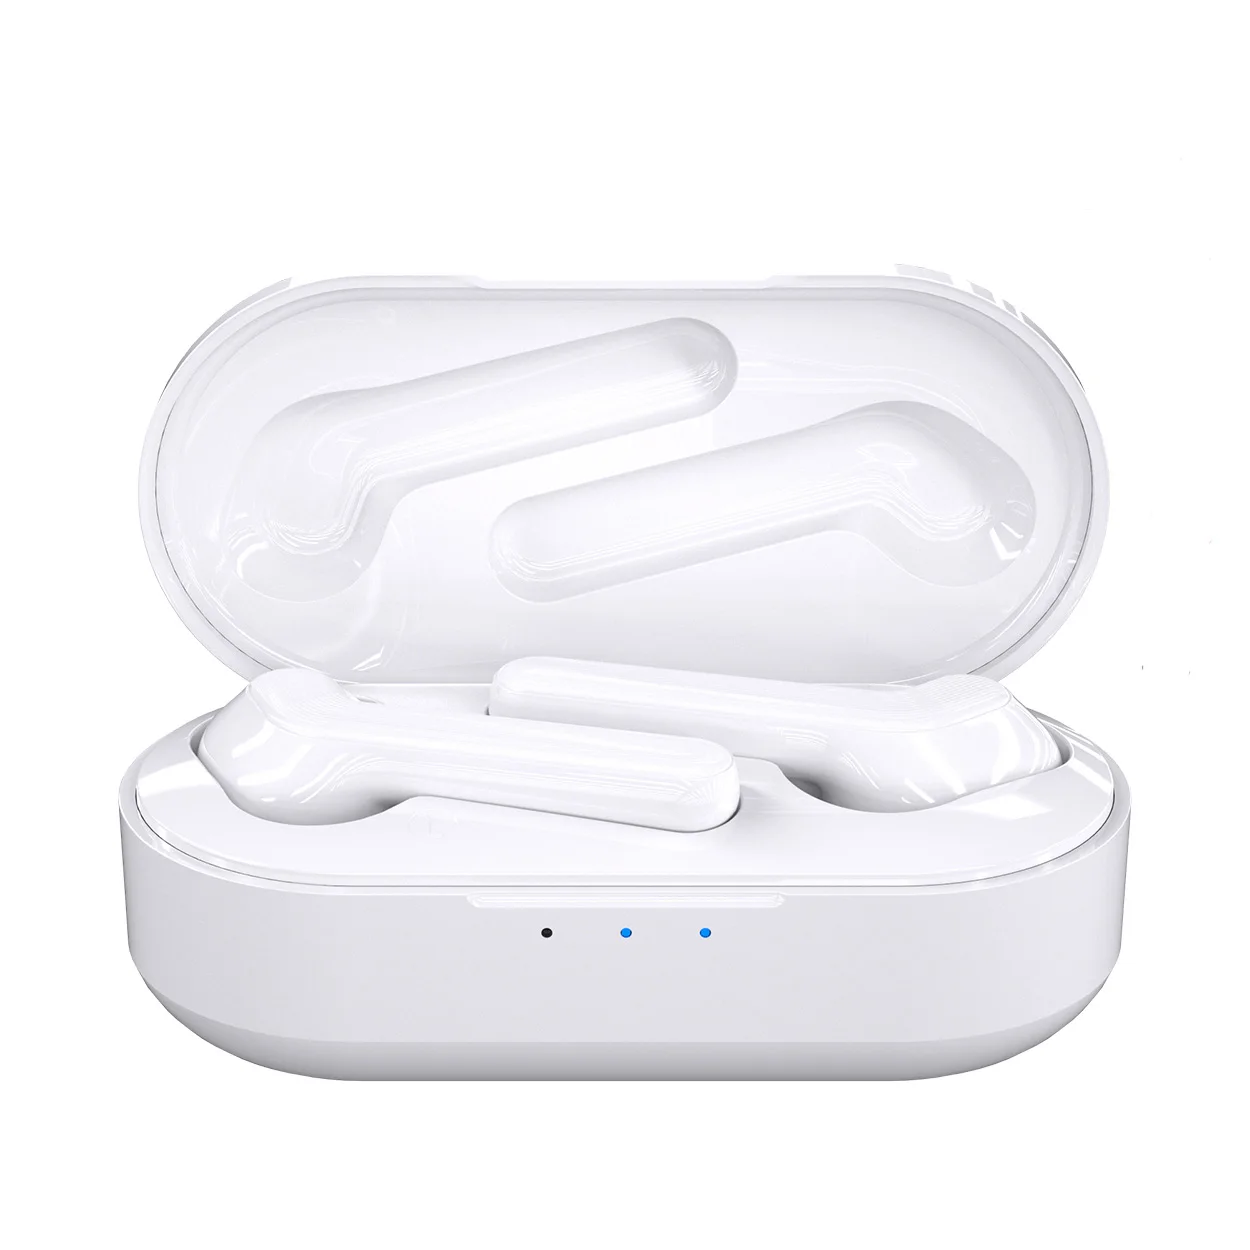 Mpow m21 tws wireless earphones bluetooth 5.0 earbuds 18h playtime touch control earphone with mic for iphone x xiaomi huawei samsung